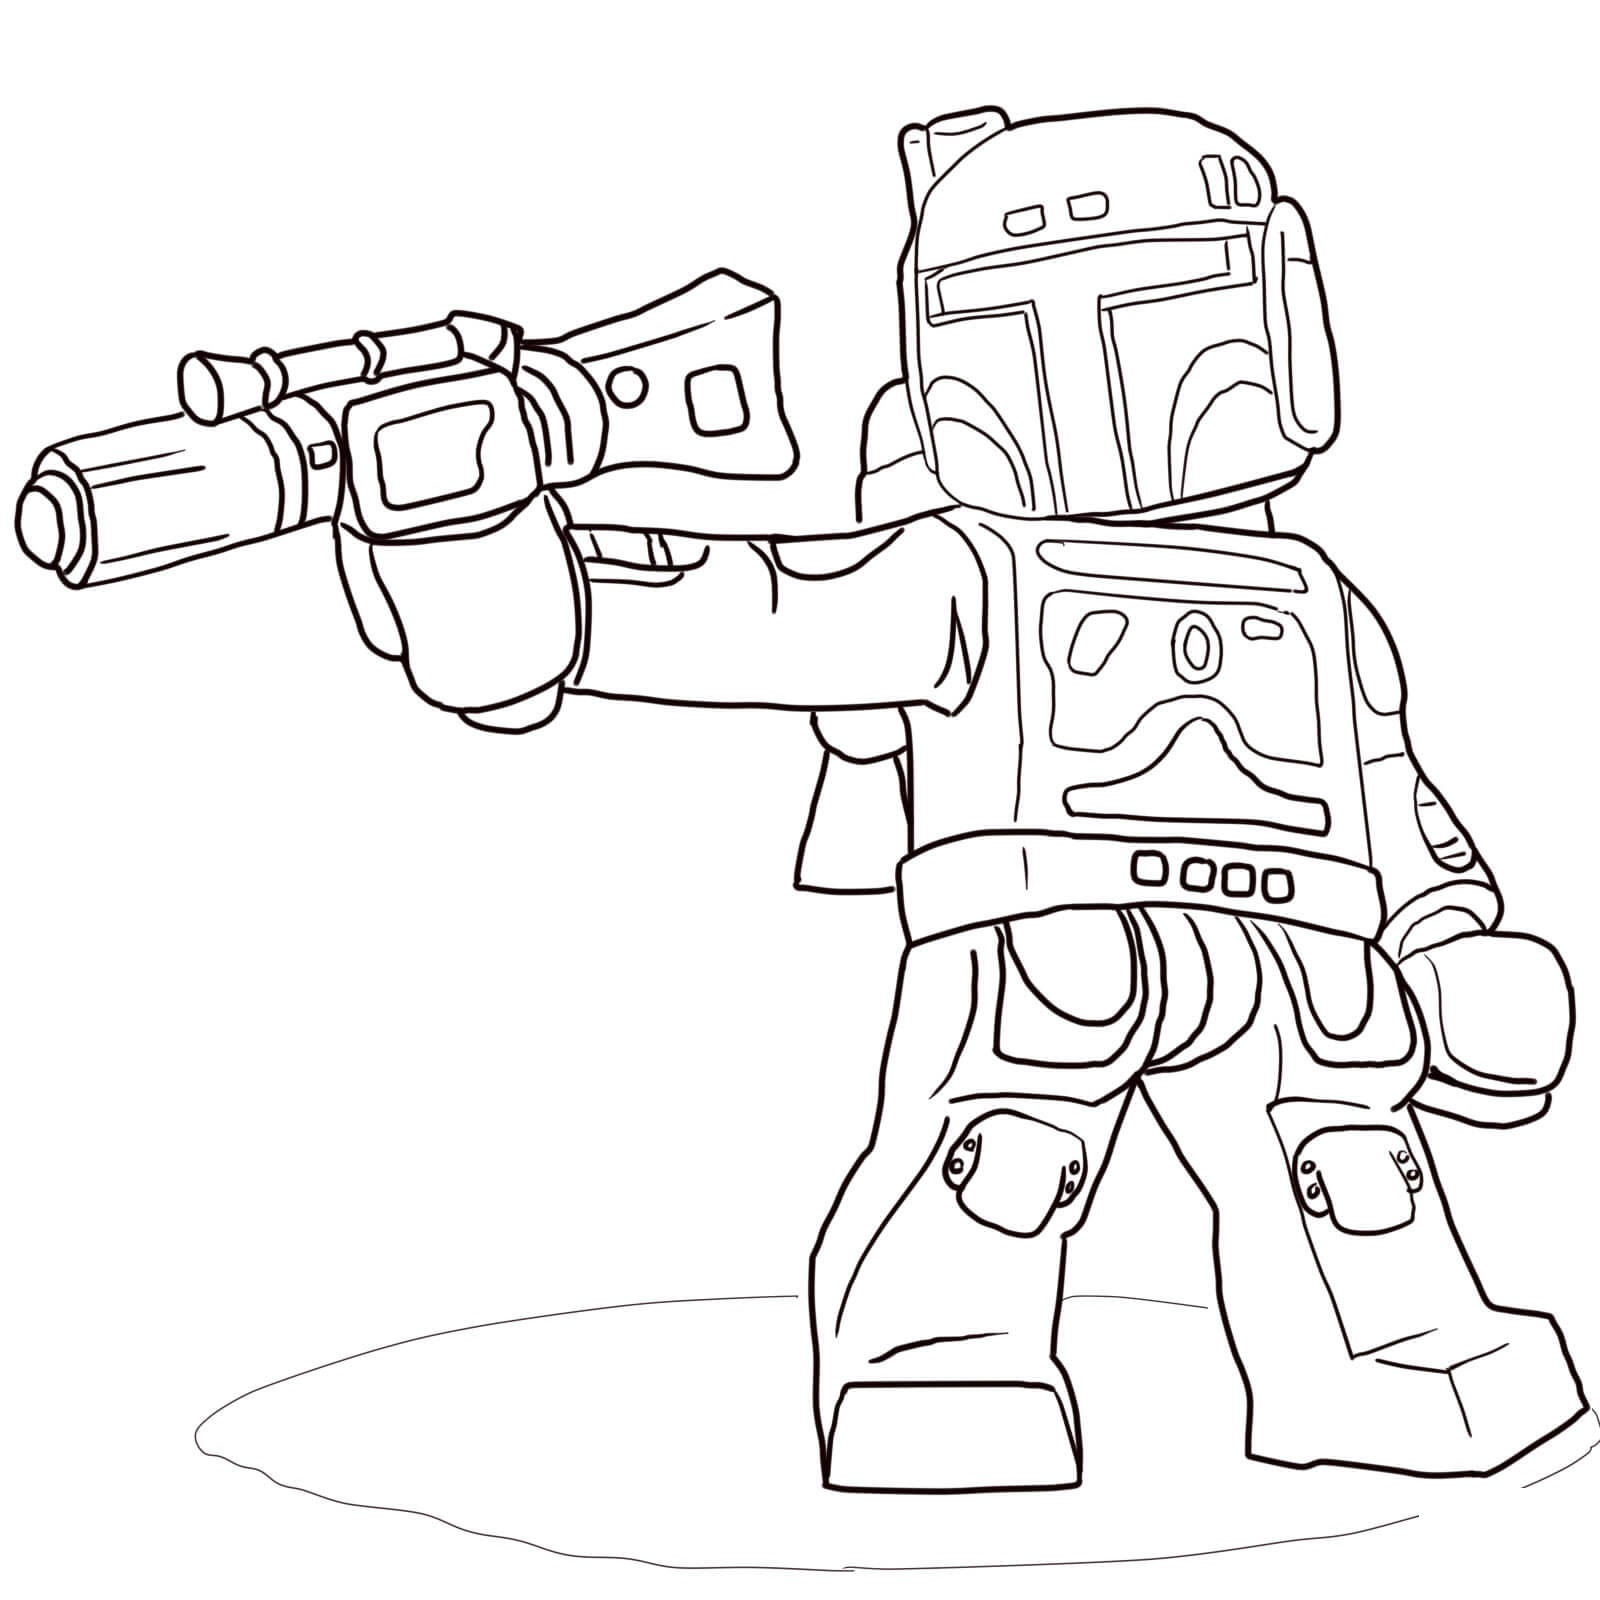 Lego Star Wars 57 Coloring Page